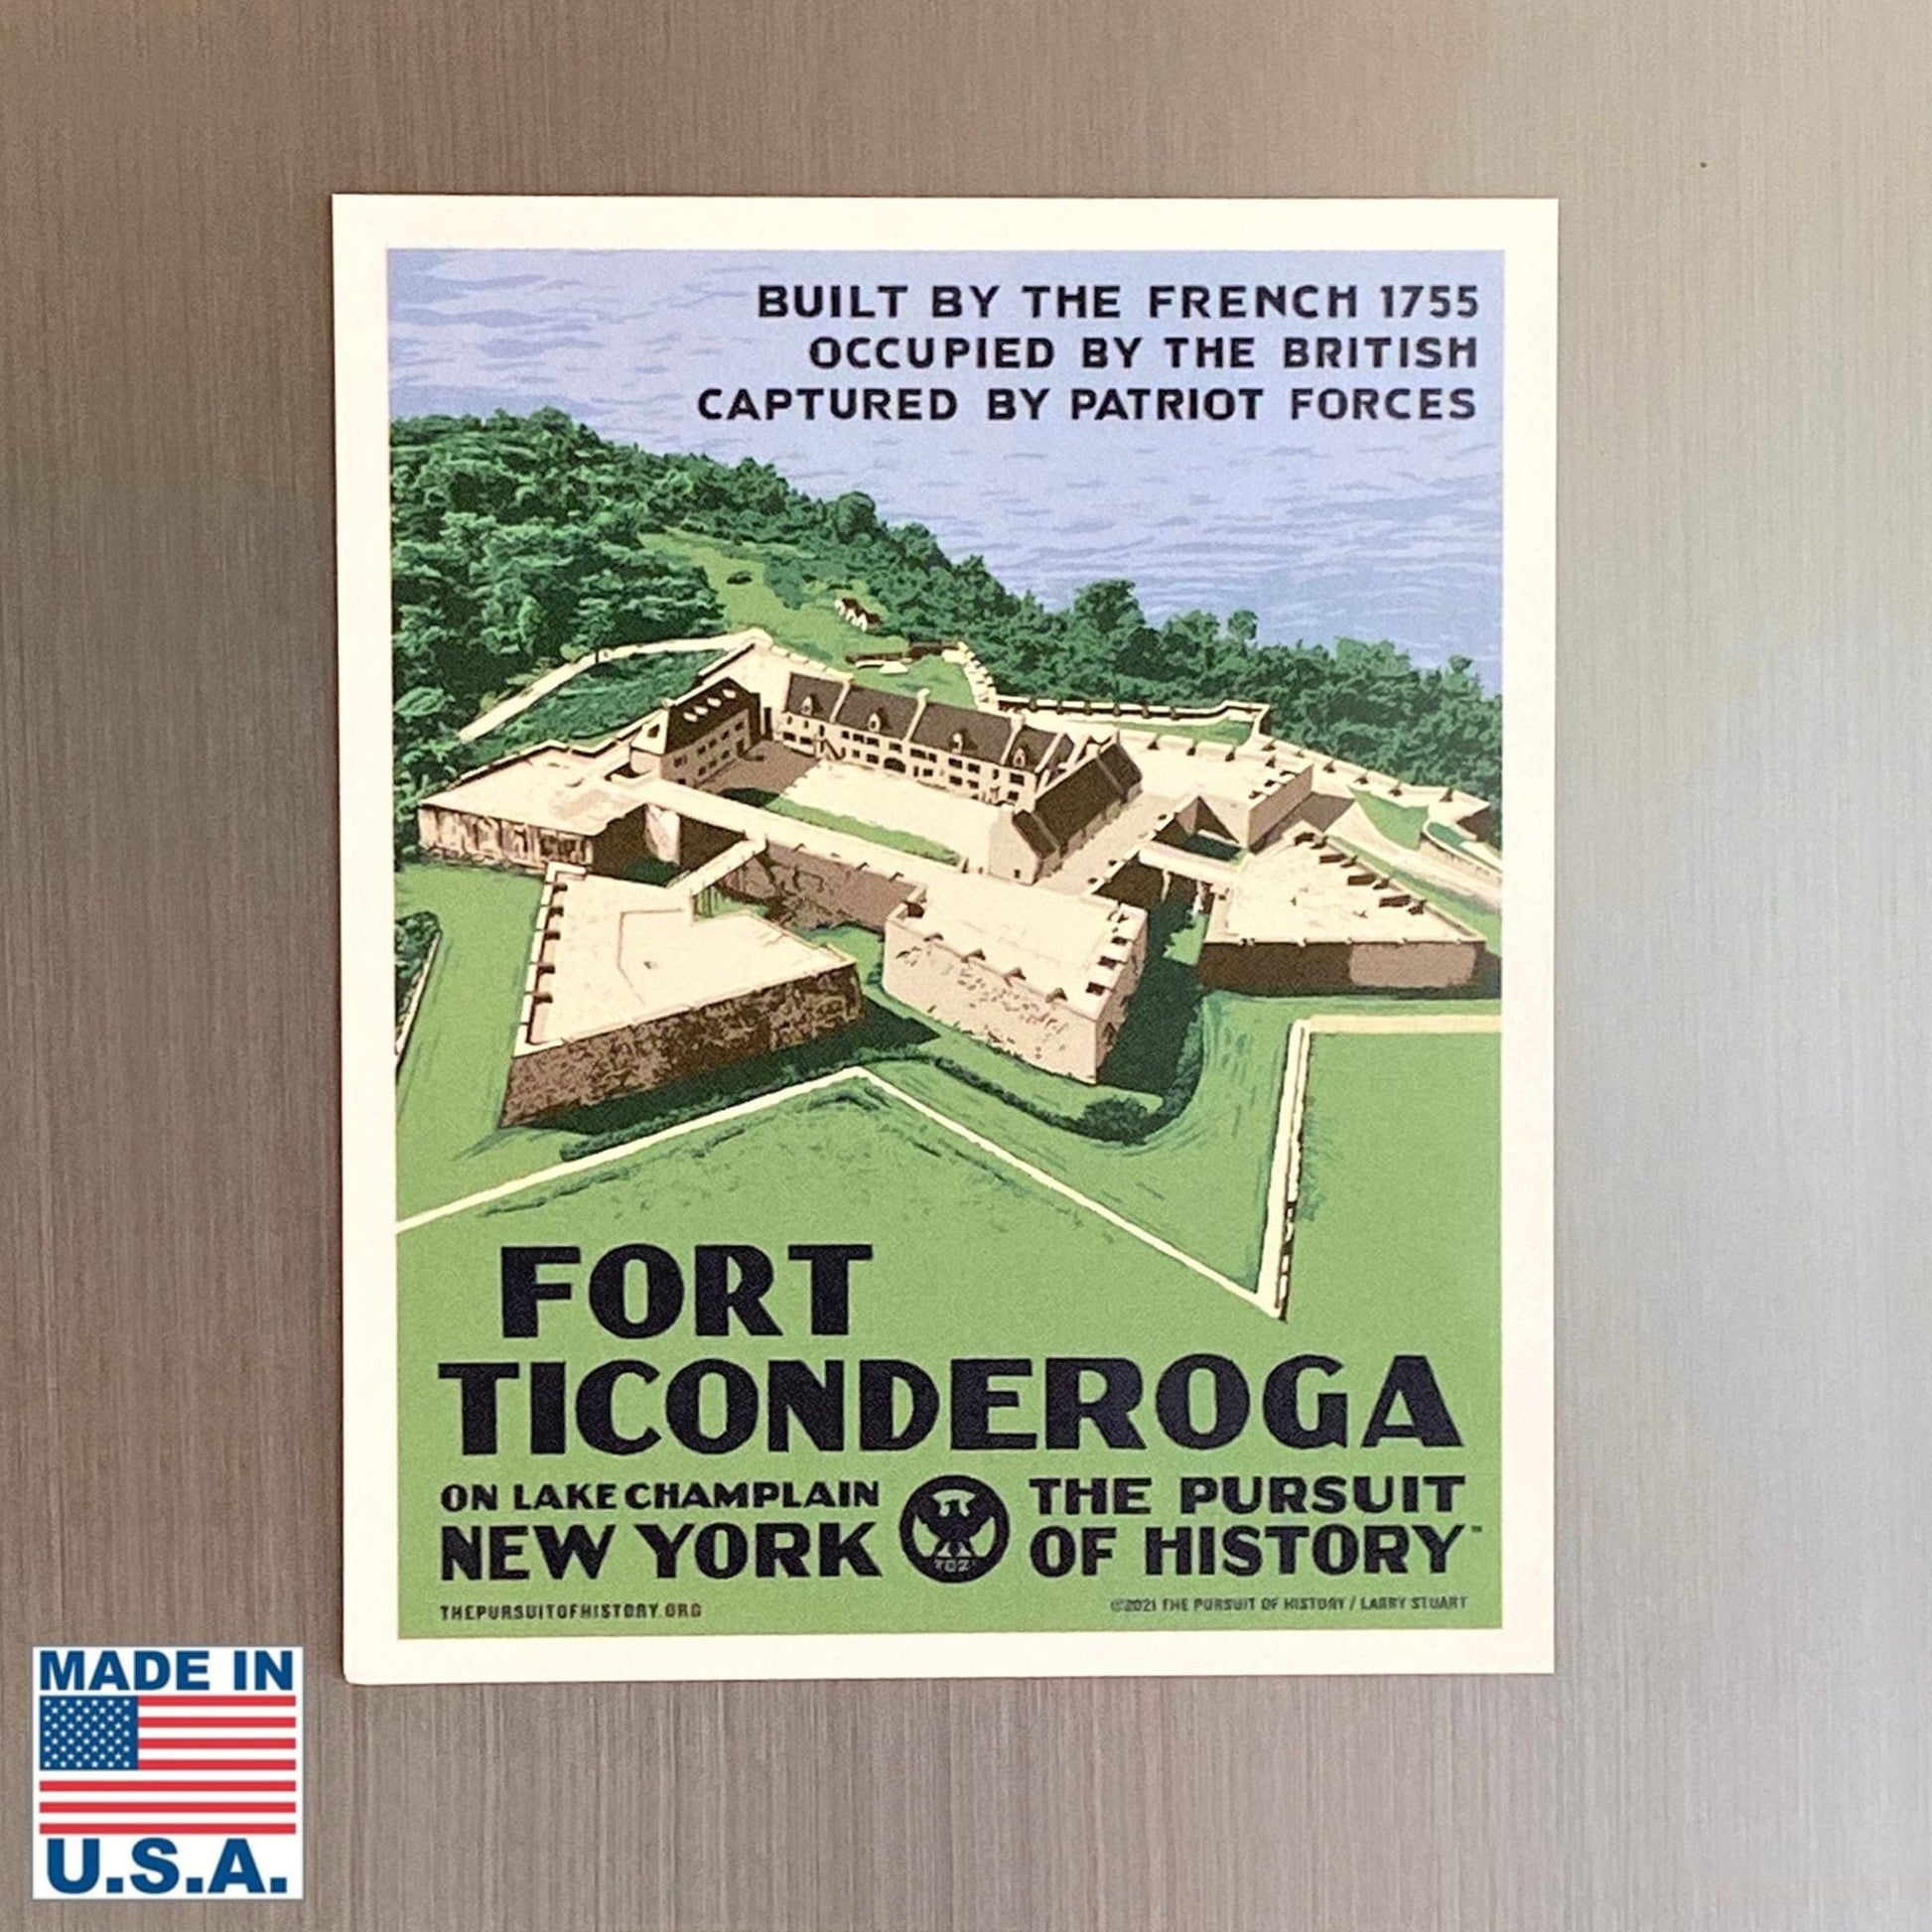 Fort Ticonderoga Magnet from the History List Store